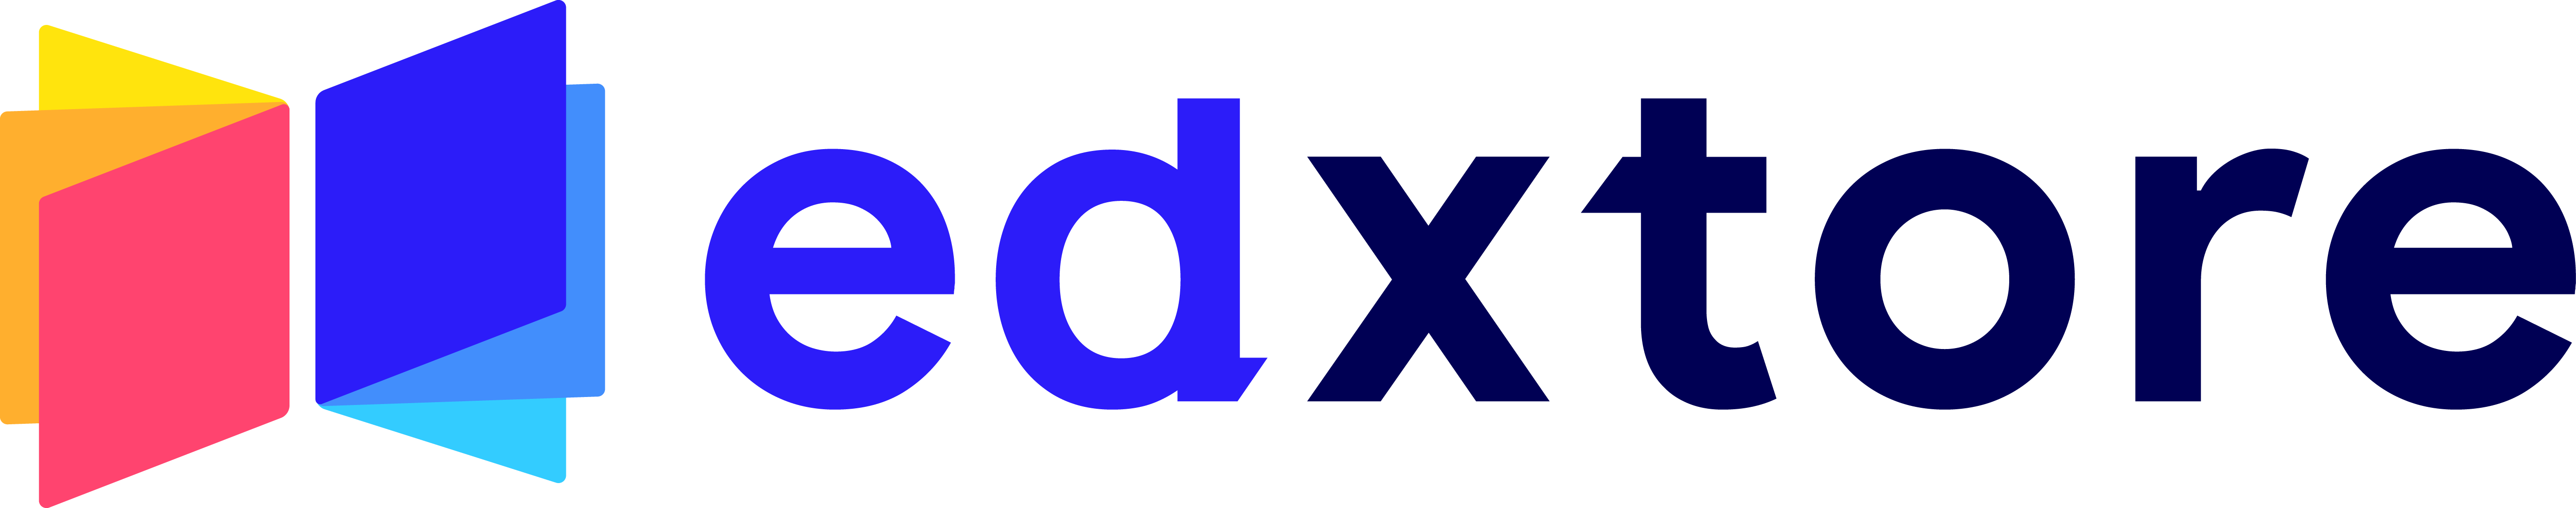 Edxtore Limited